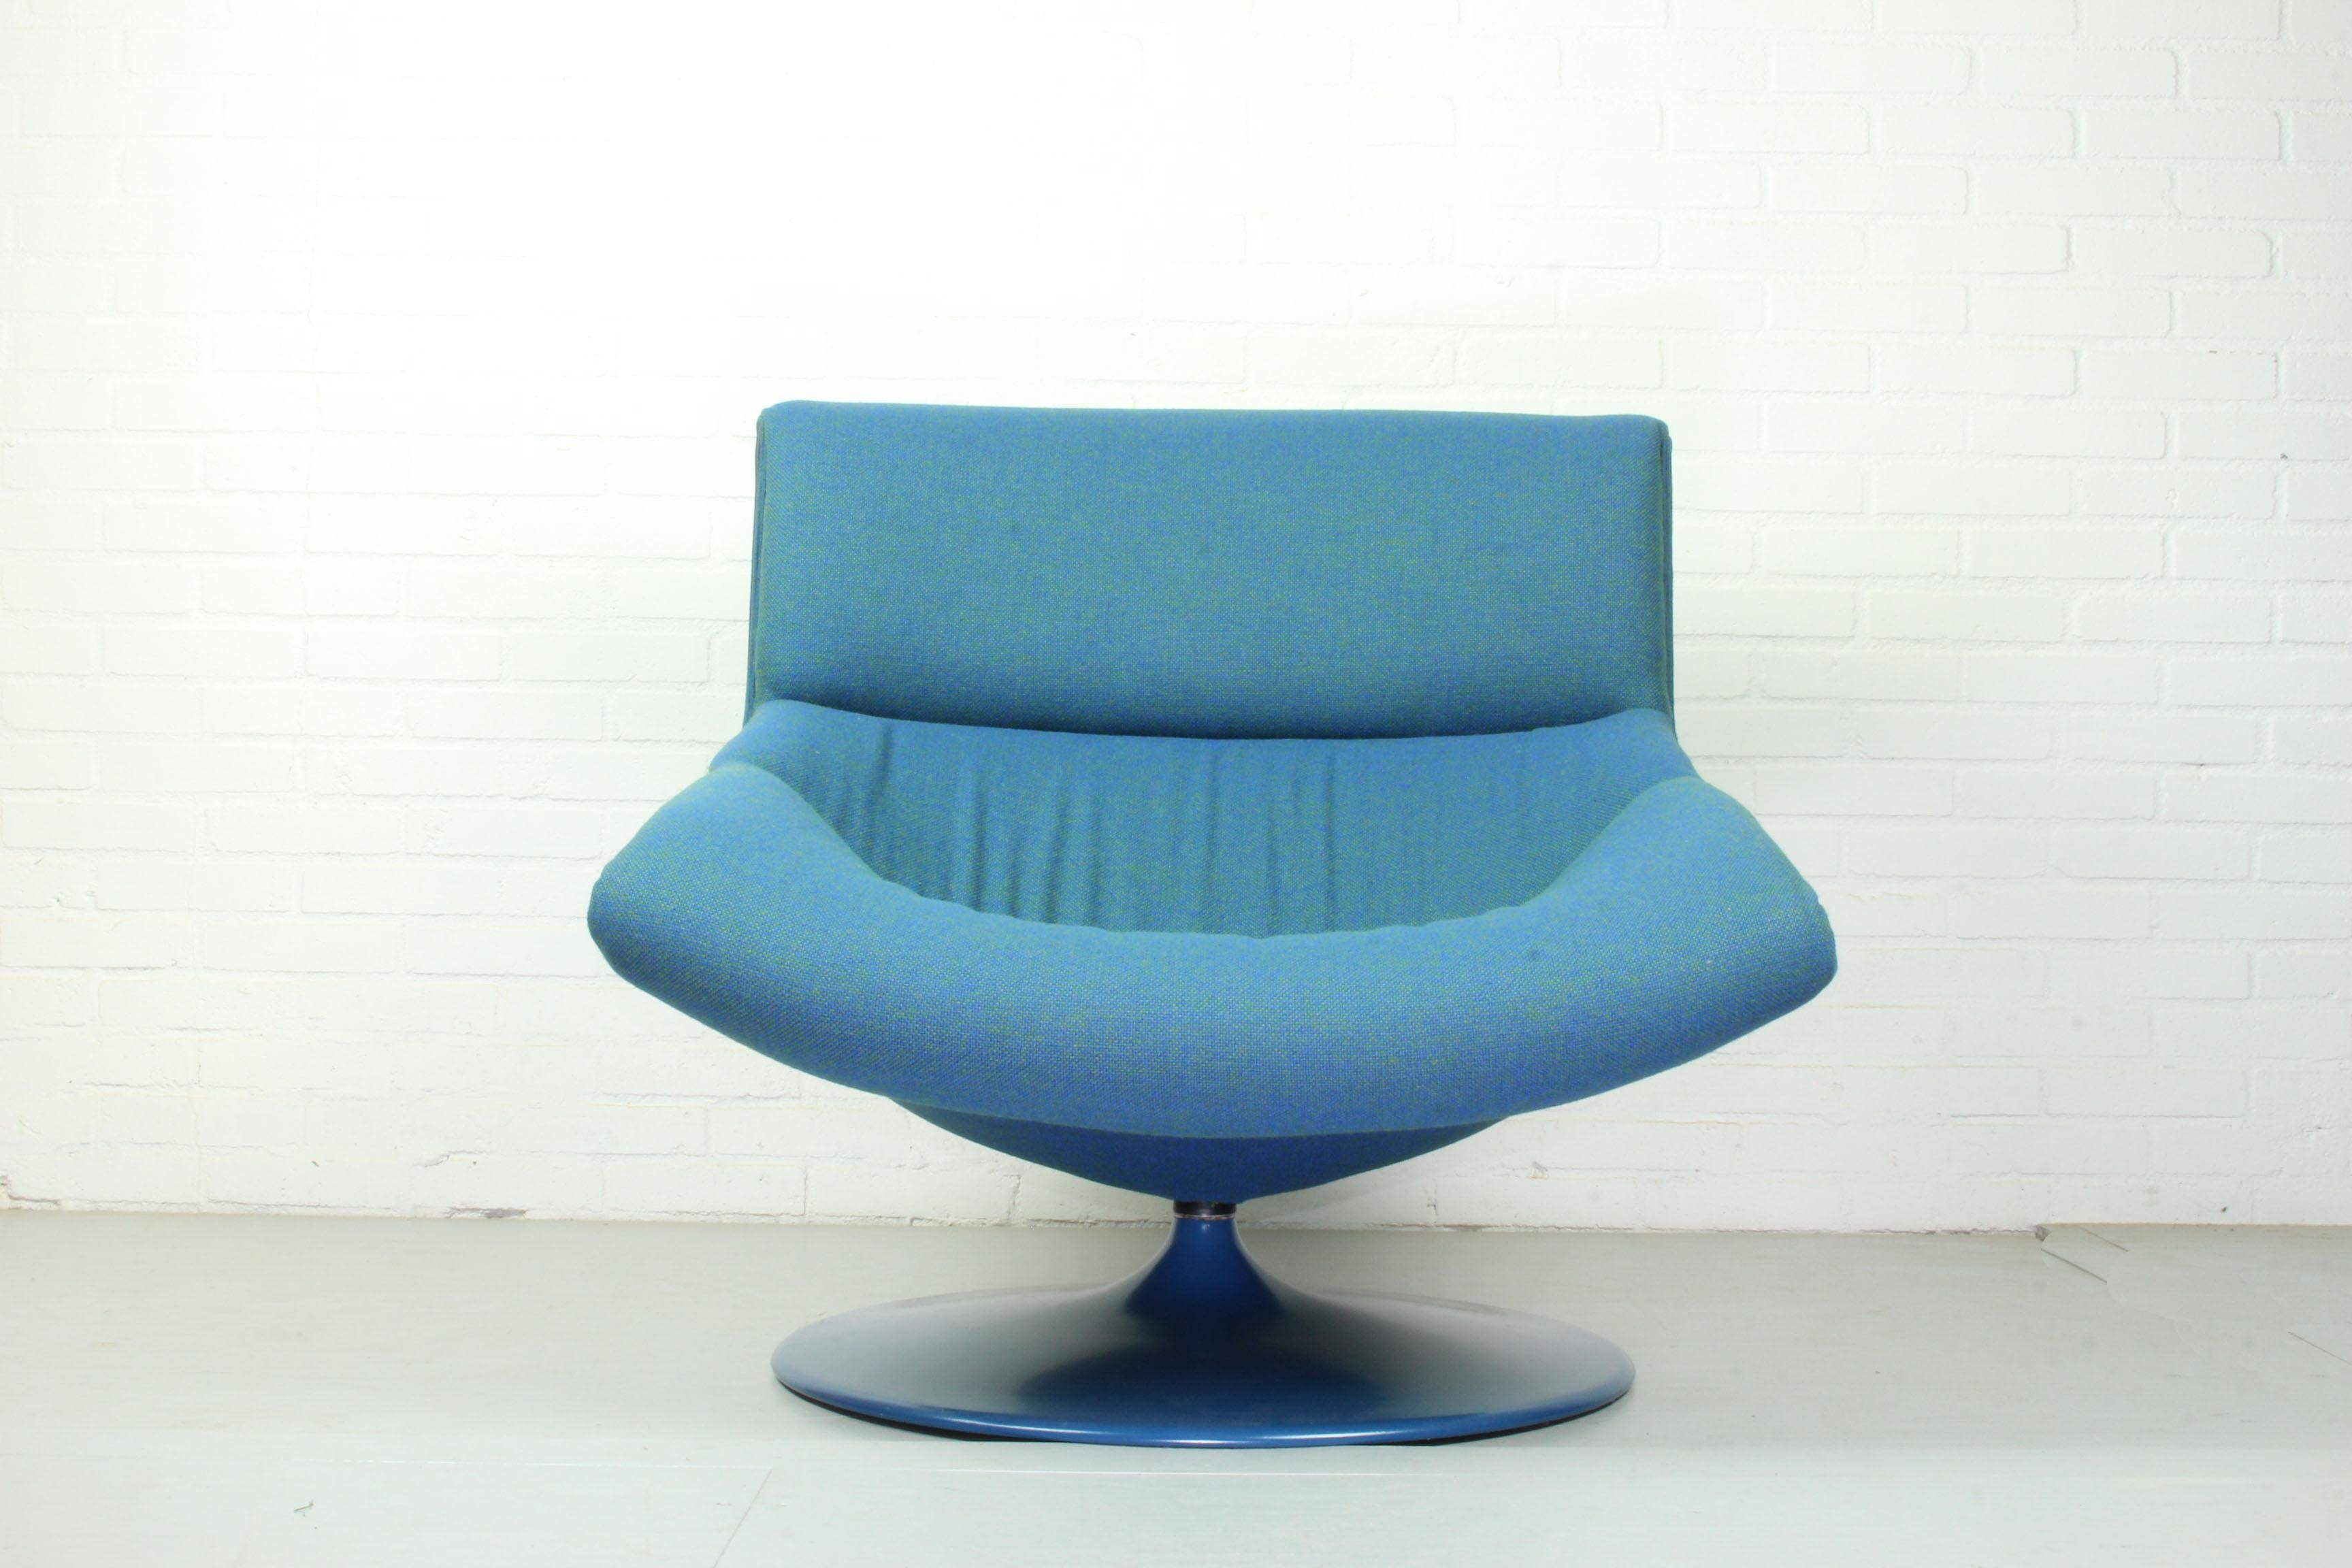 Rare vintage lounge chair F520 designed by Geoffrey Harcourt produced by Artifort. New upholstery with beautiful blue/green Kvadrat Hallingdal.